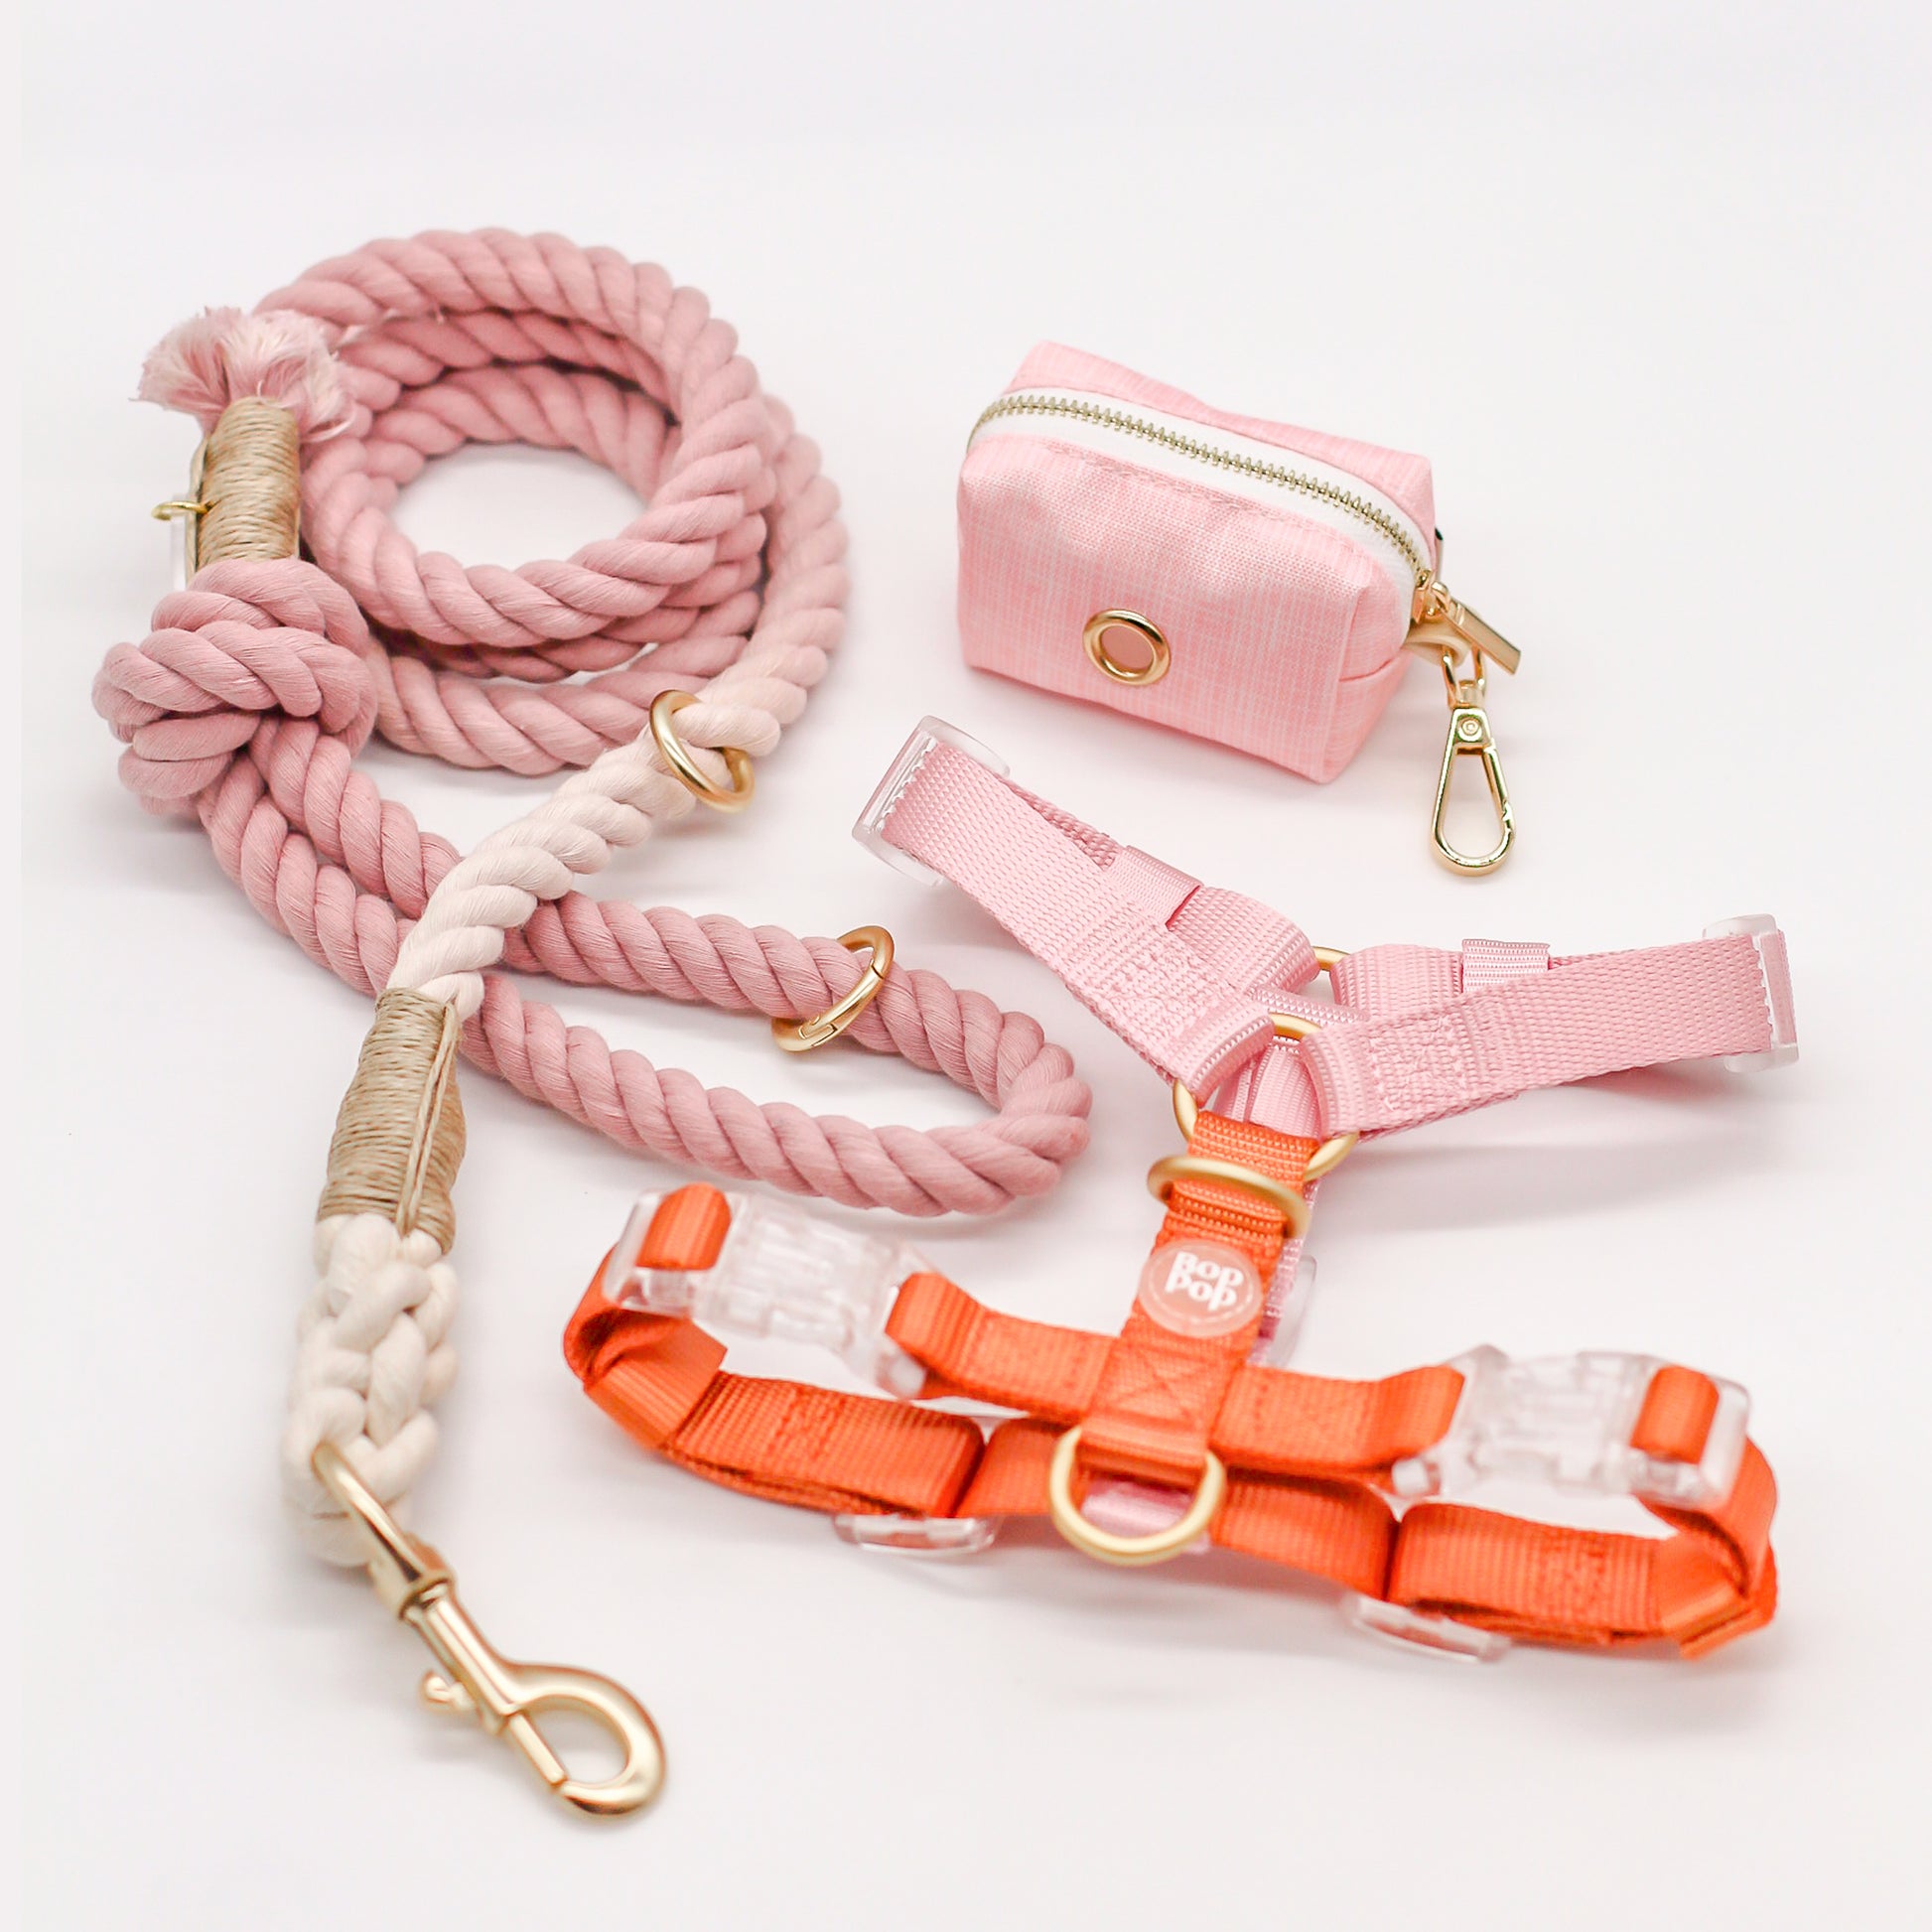 100% cotton rope leash ombre dusty pink pastel 5ft handle ORing gold hardware dog walking pet accessory  fade hemp cord with matching set combo poop bag holder dispenser matching set combo harness nylon orange pink bop pop pets